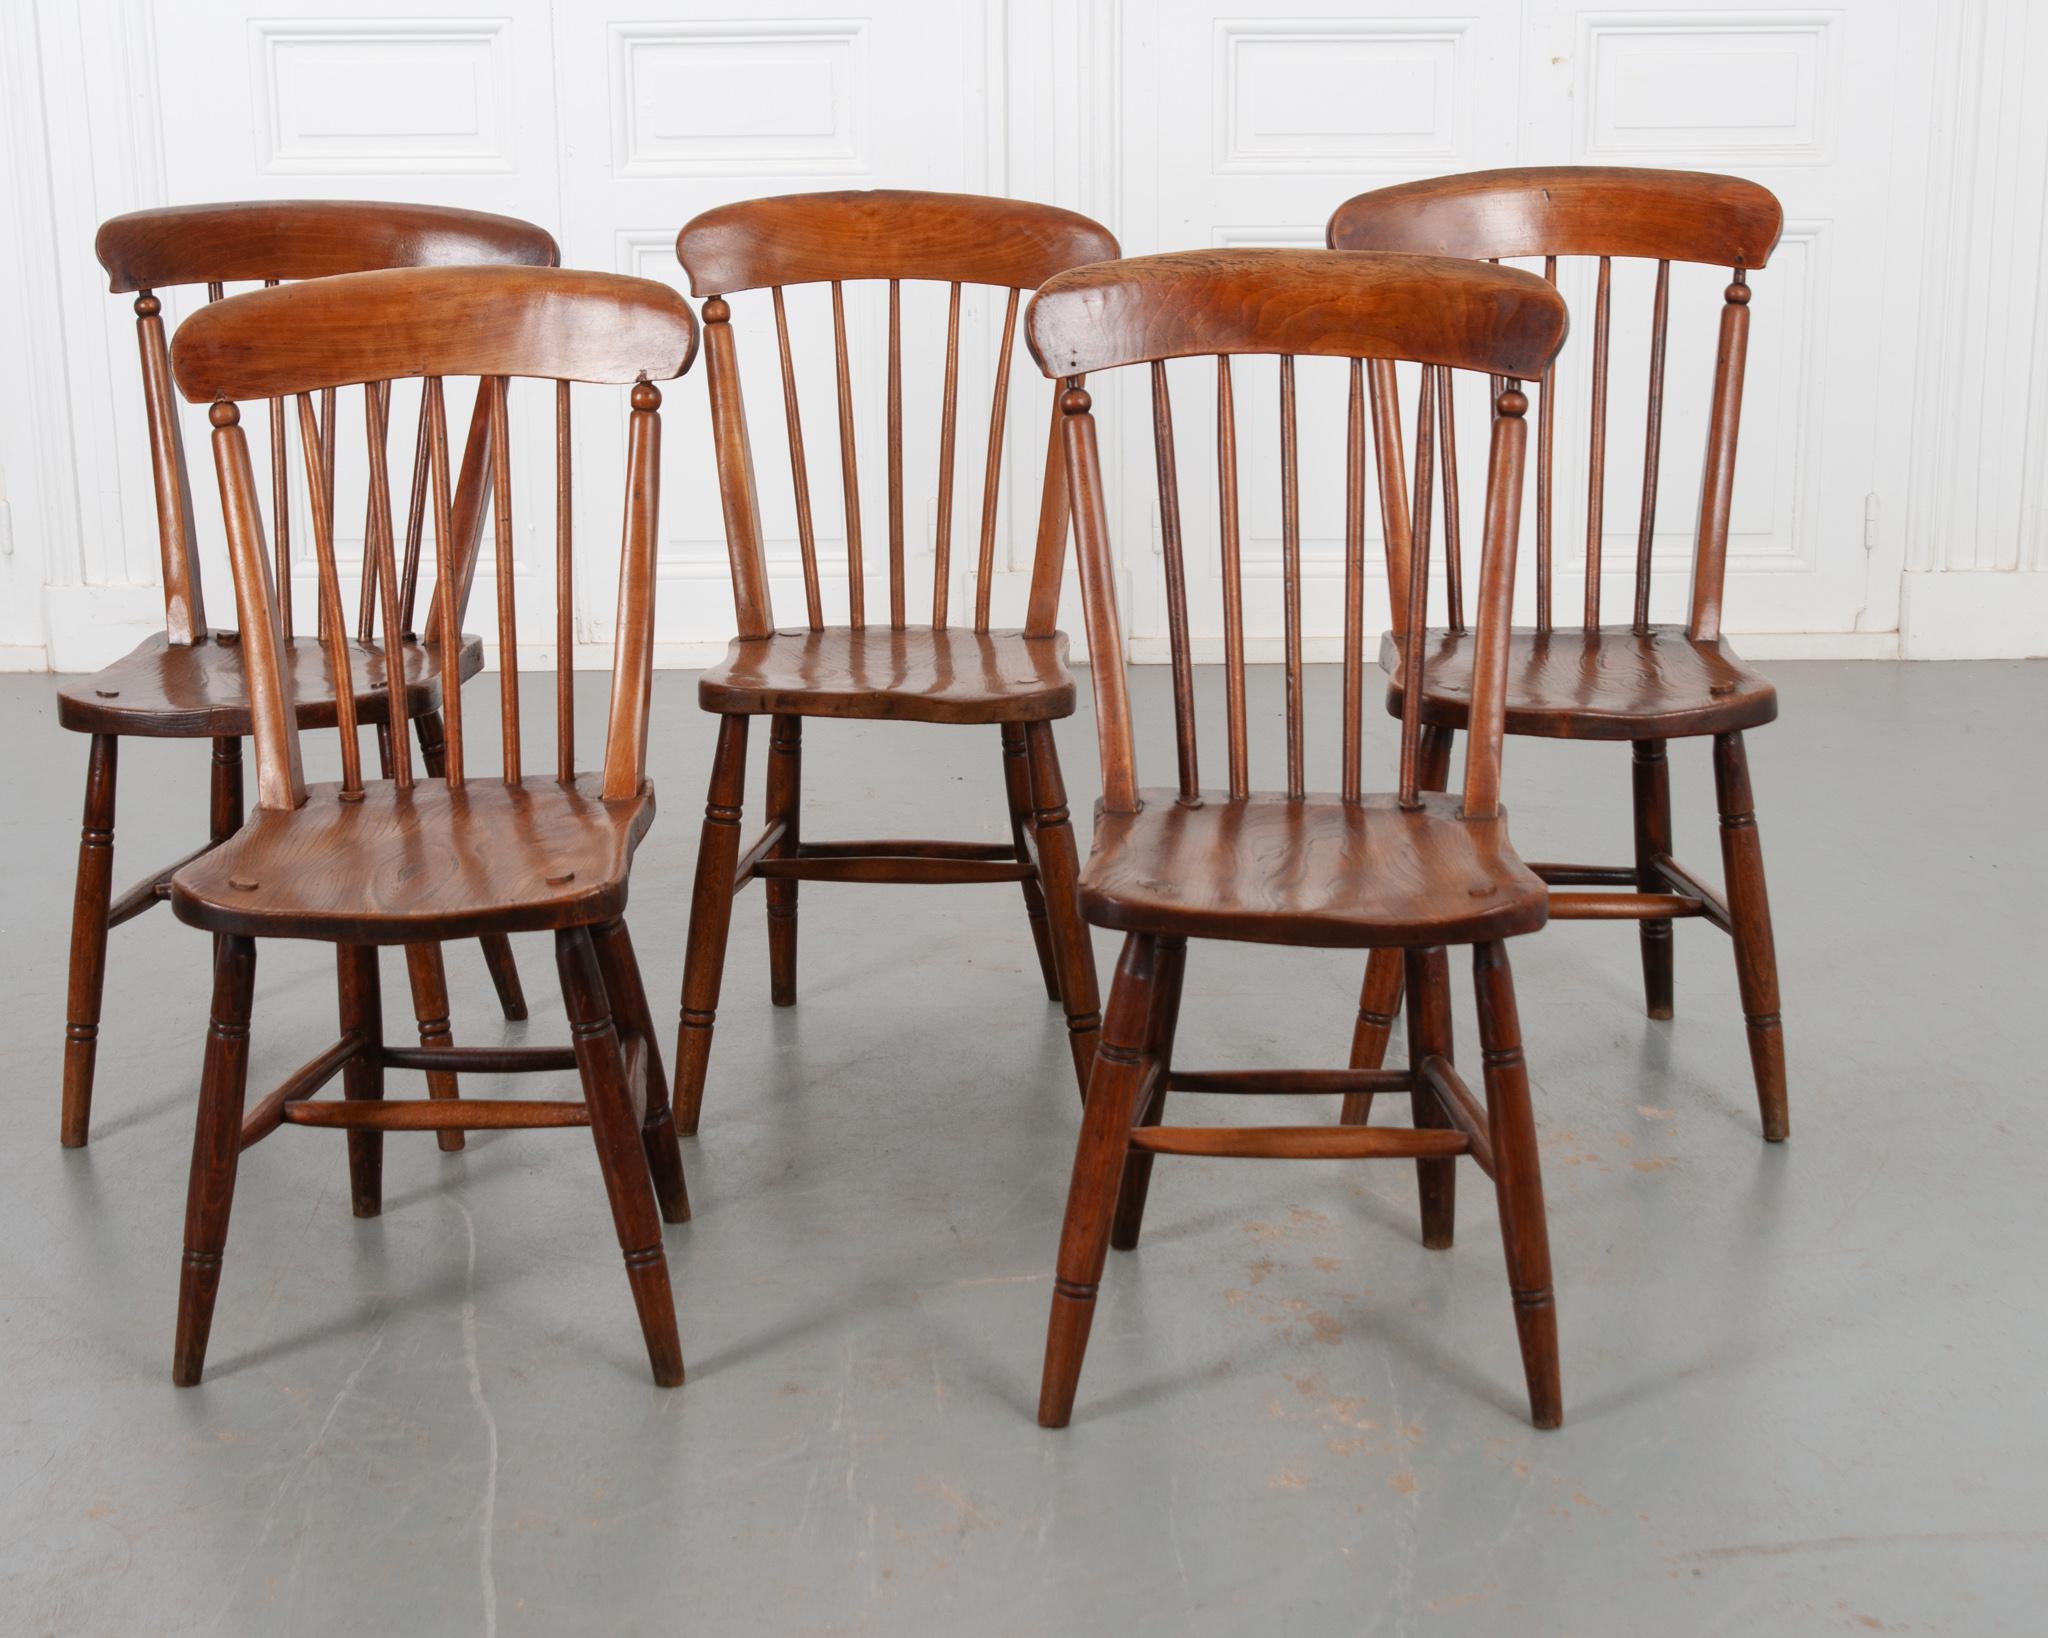 French Provincial Set of 5 English 19th Century Oak Dining Chairs For Sale